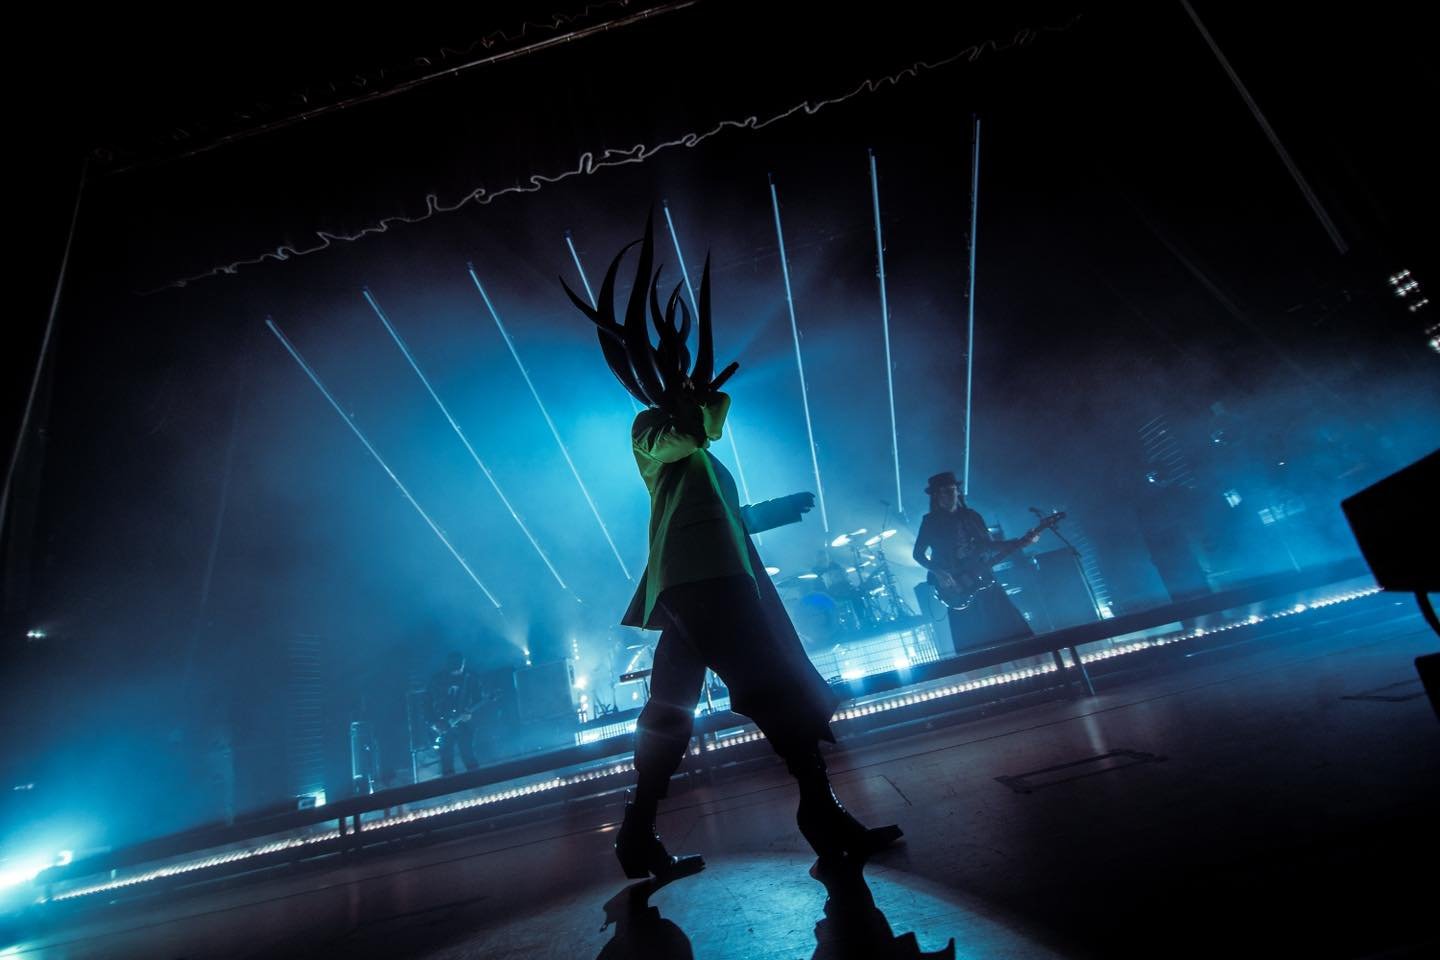 We&rsquo;re reminiscing about some of our favourite 2022 tour moments. Let us know yours in the comments below. 🤘🧡

#SkunkAnansie #SkunkAnansieLive #OnTour